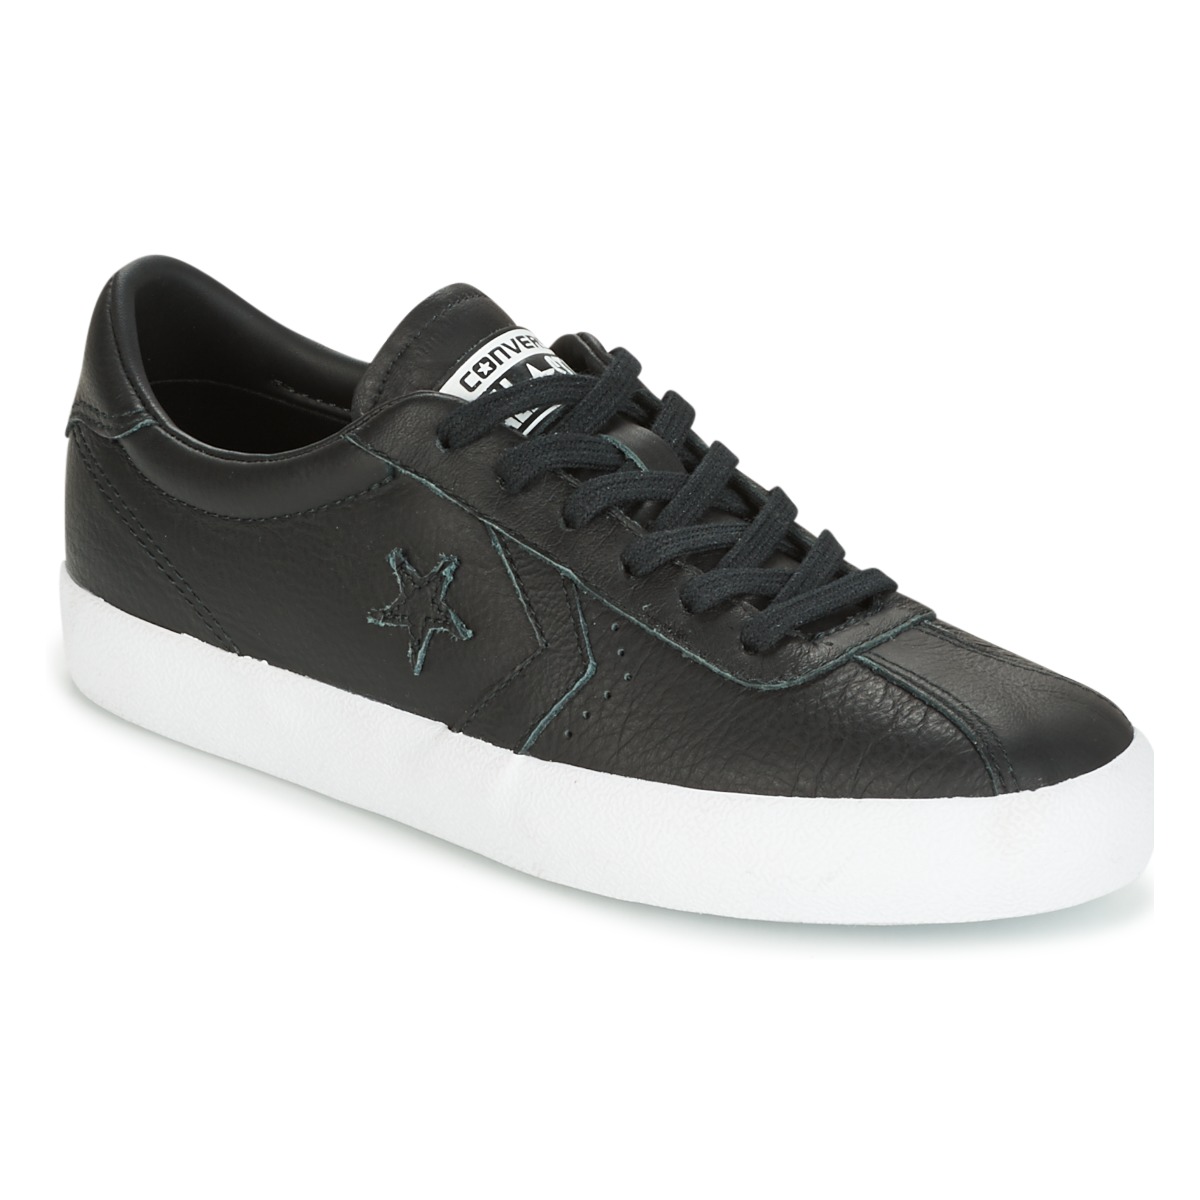 Converse BREAKPOINT FOUNDATIONAL LEATHER OX BLACK/BLACK/WHITE ... علب مكسرات